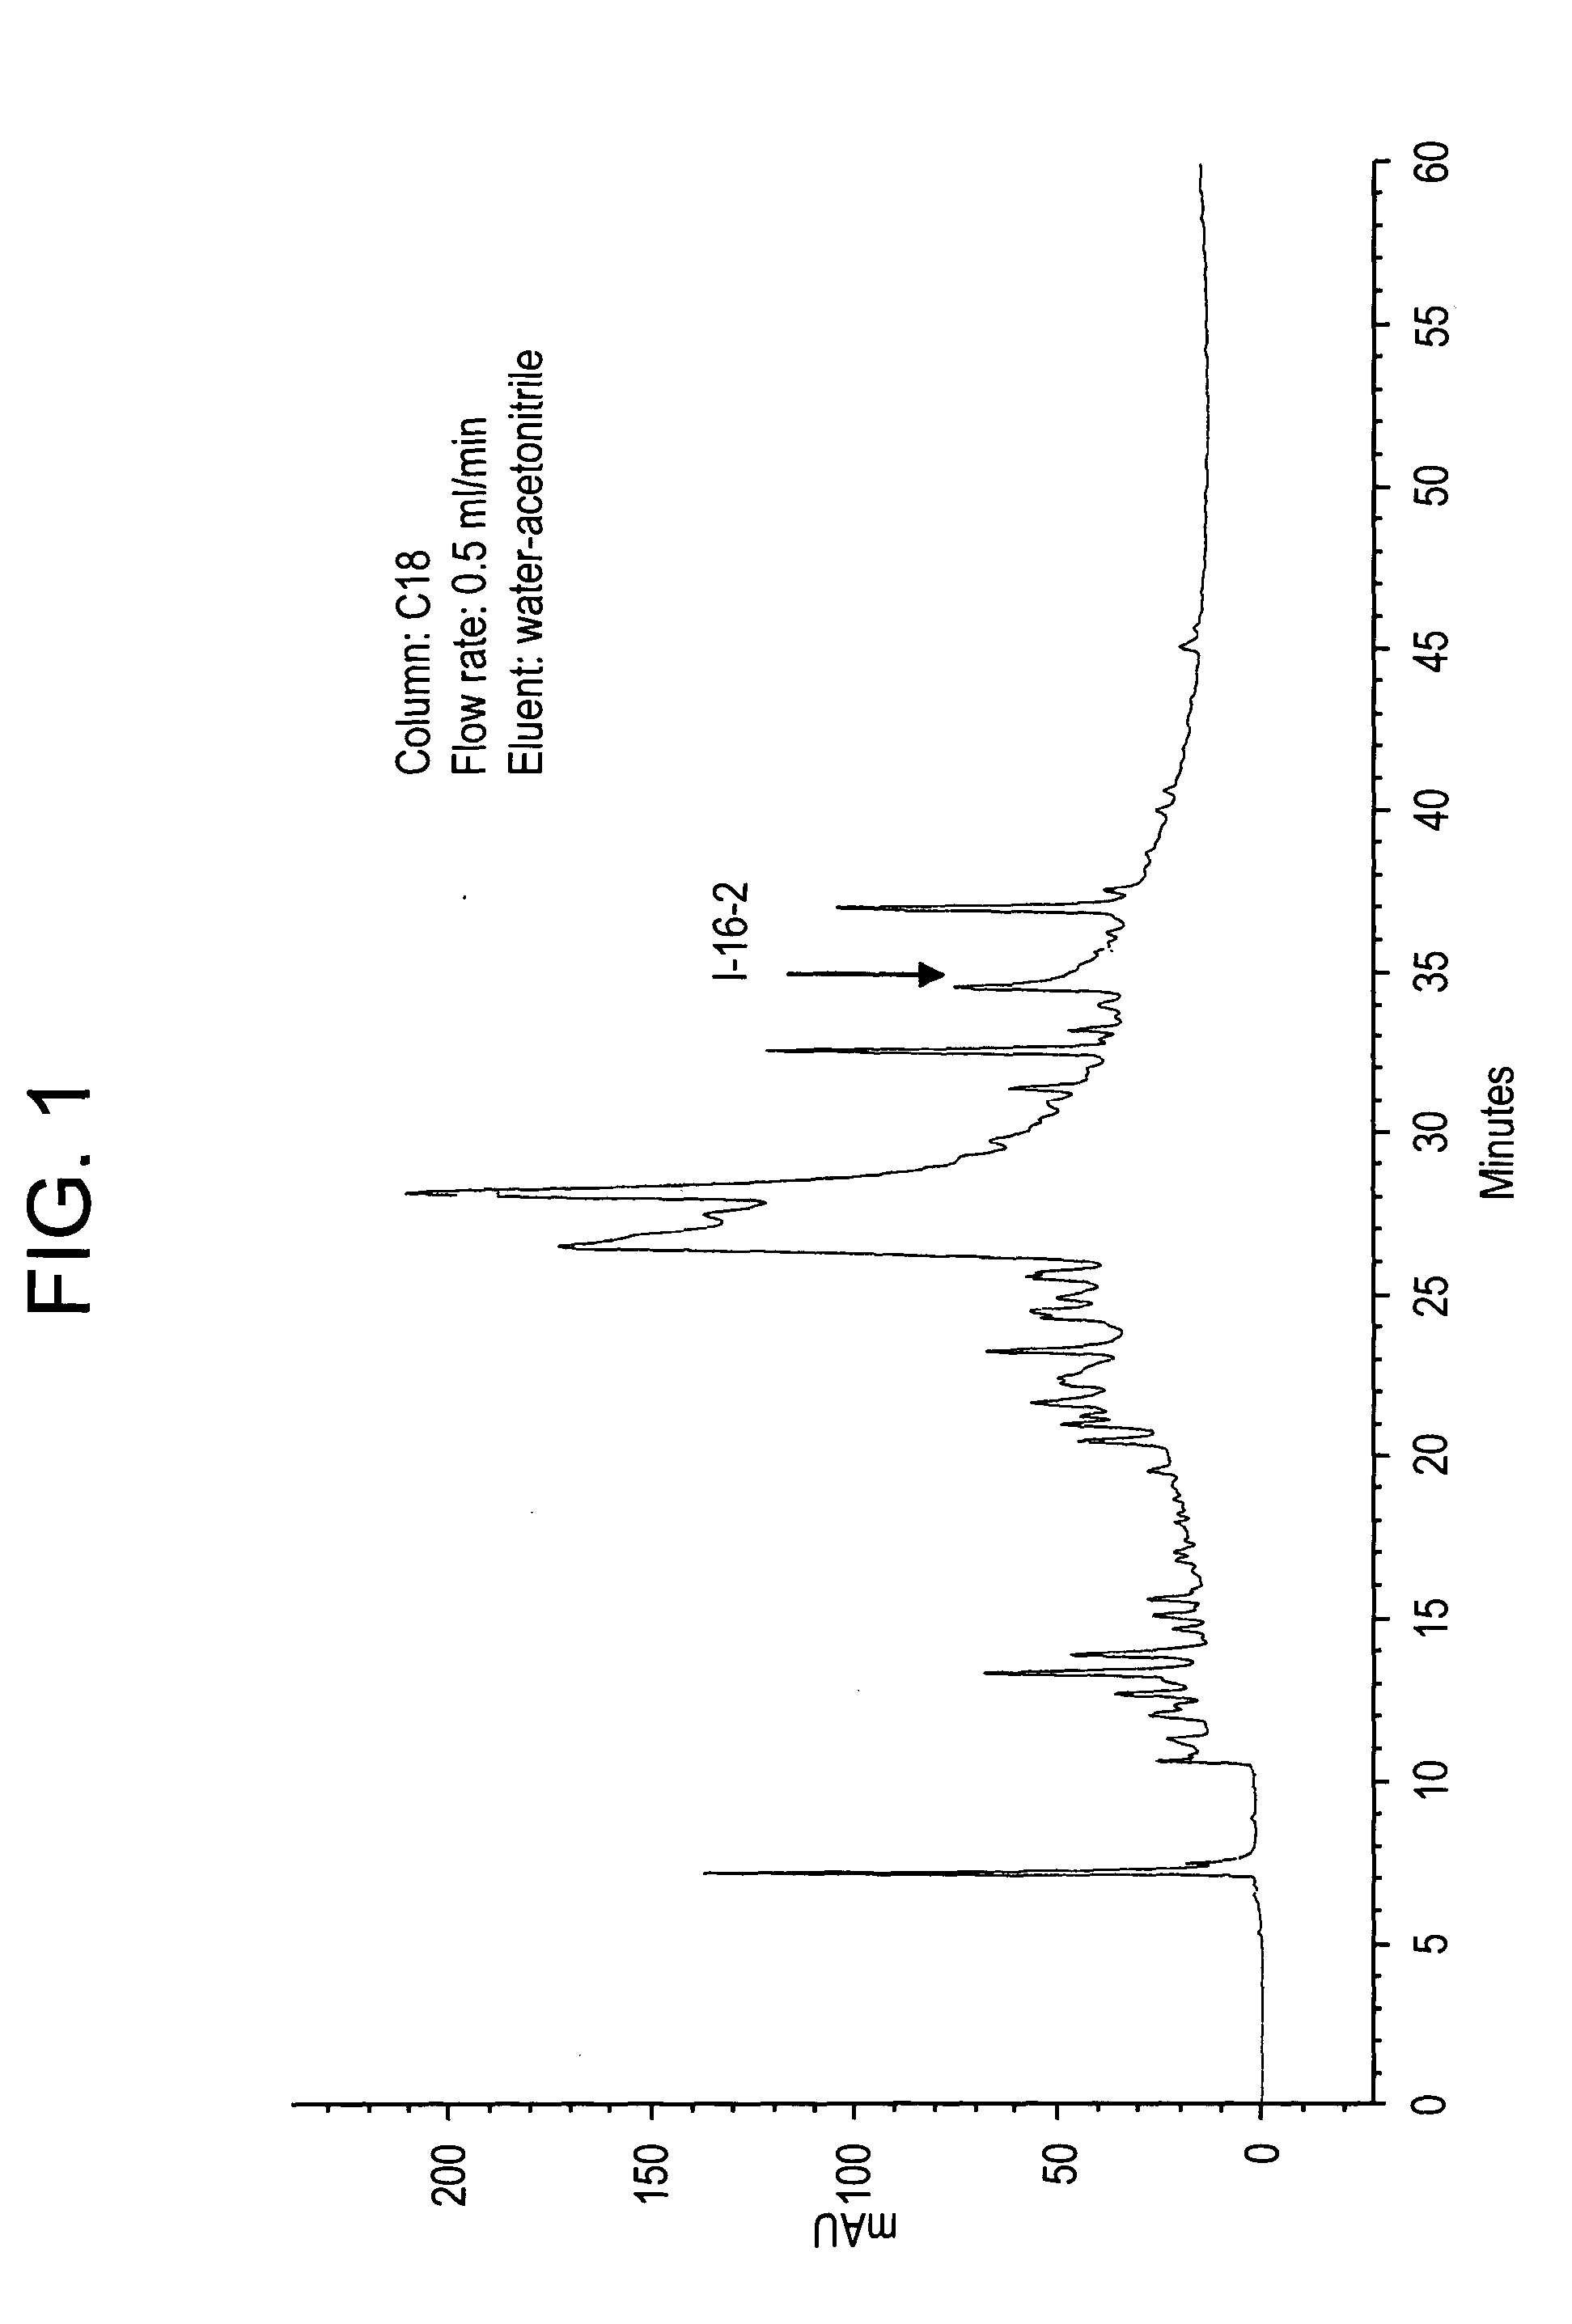 Botanical extract compositions and methods of use